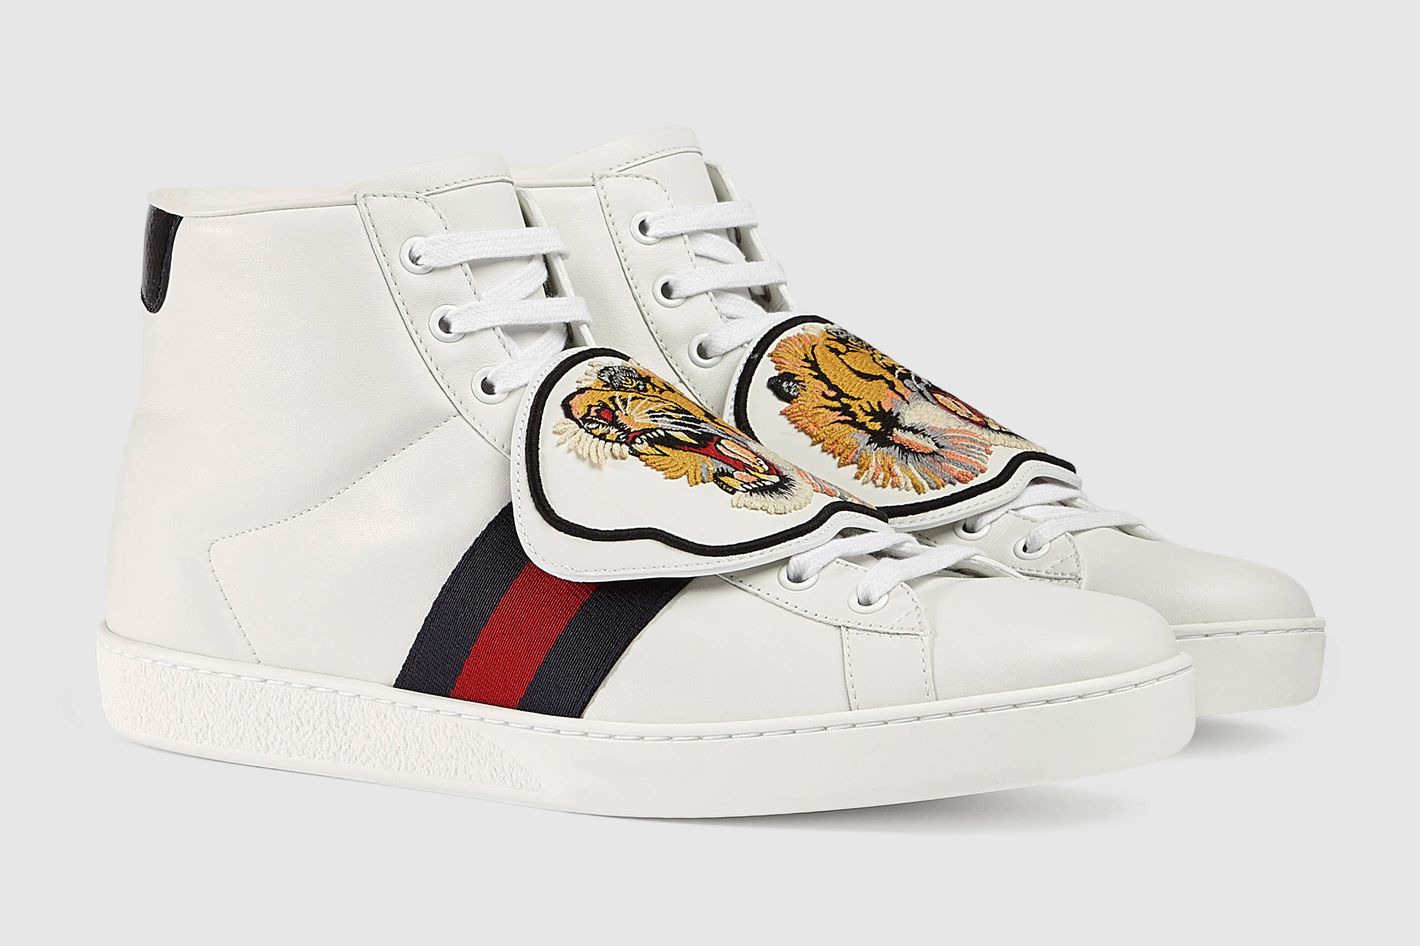 Customize Your Own Gucci Sneakers